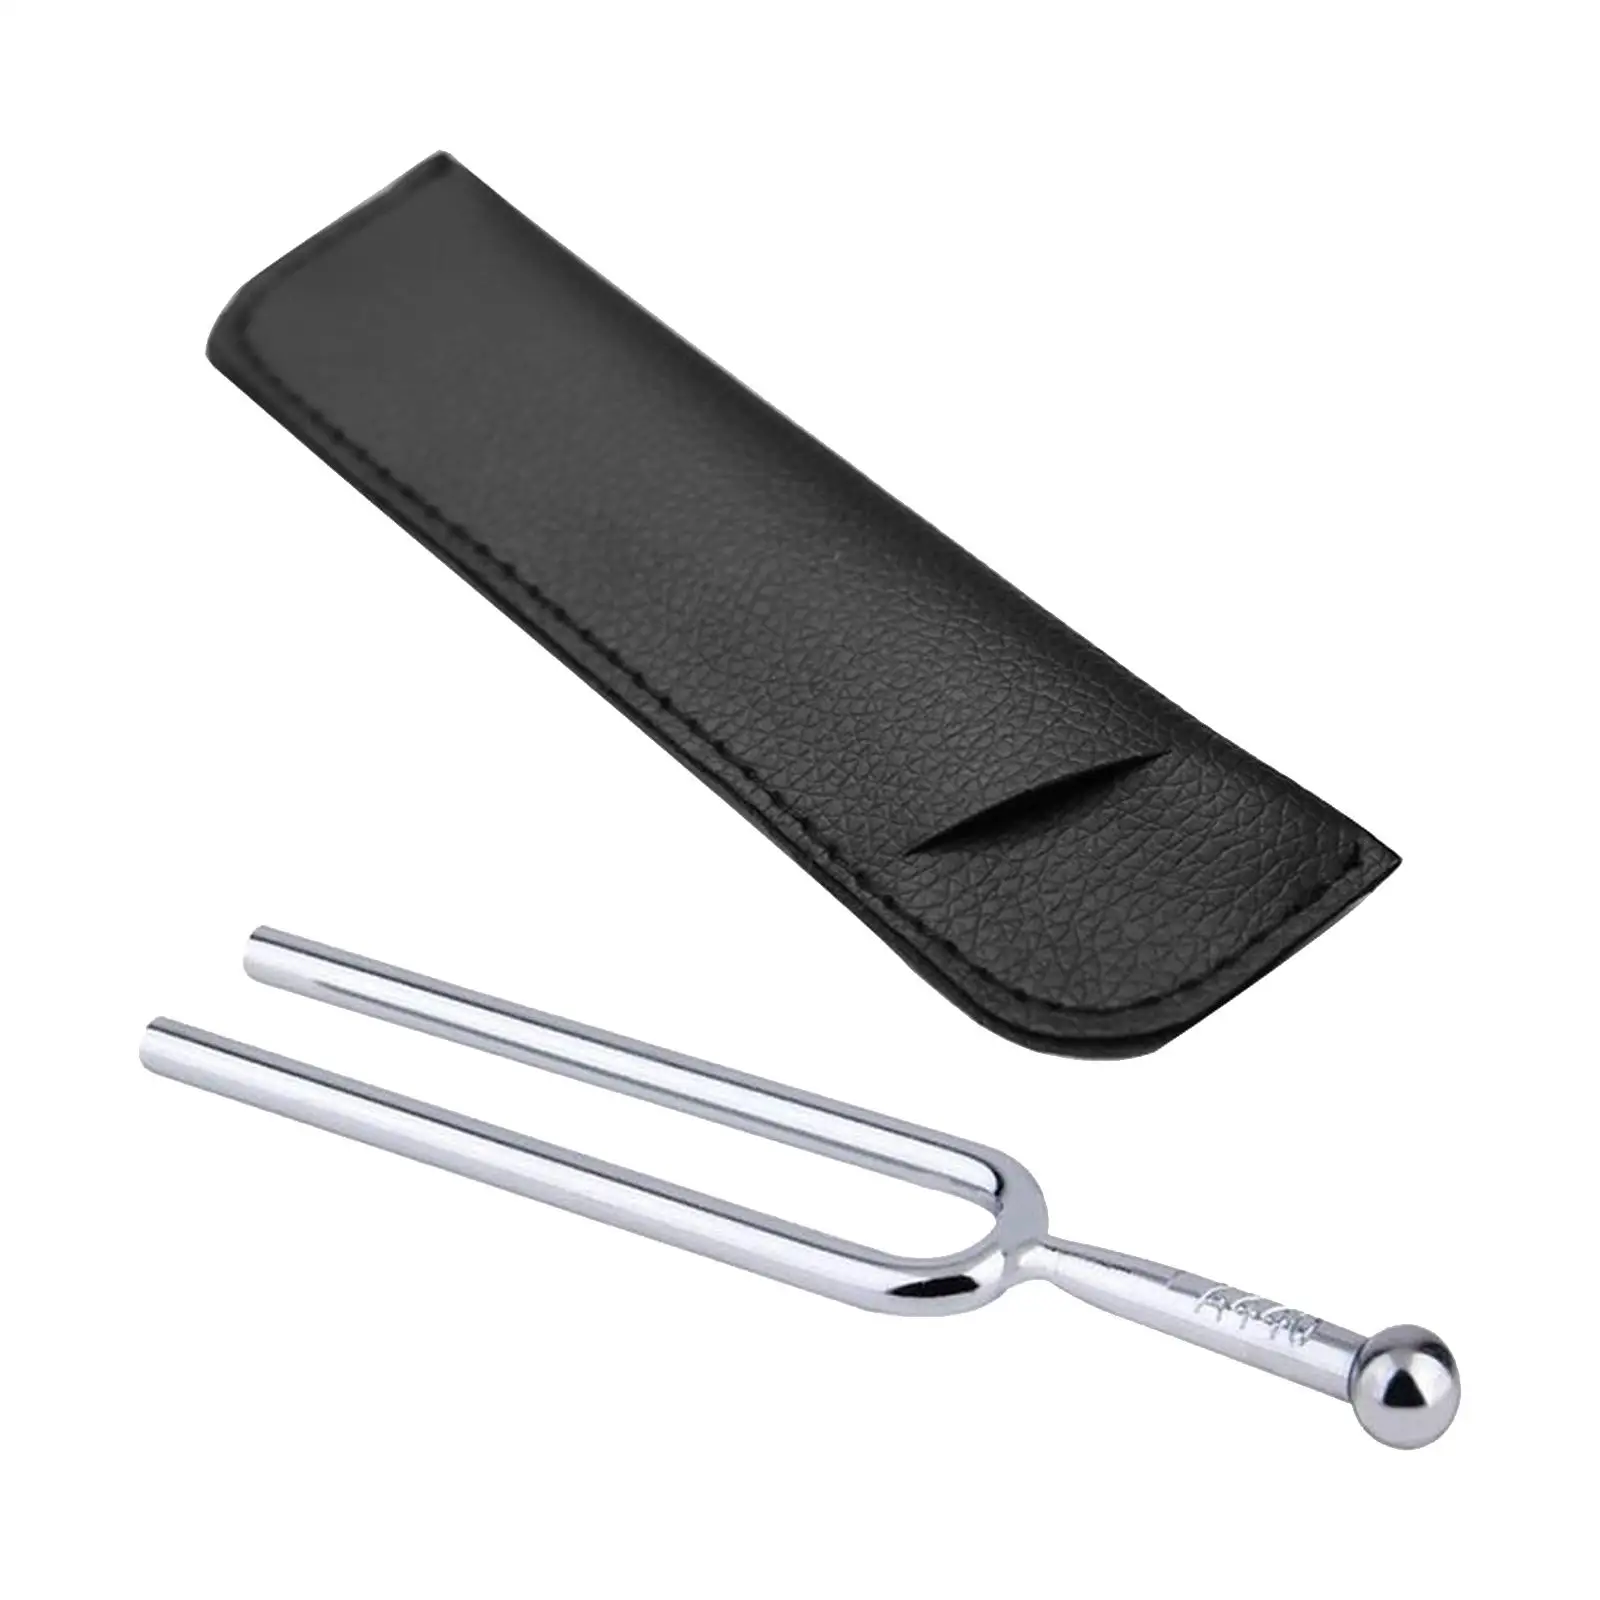 Tuning Fork Instrument with Cleaning Cloth Bag Violin Guitar Tuner Device for Classroom